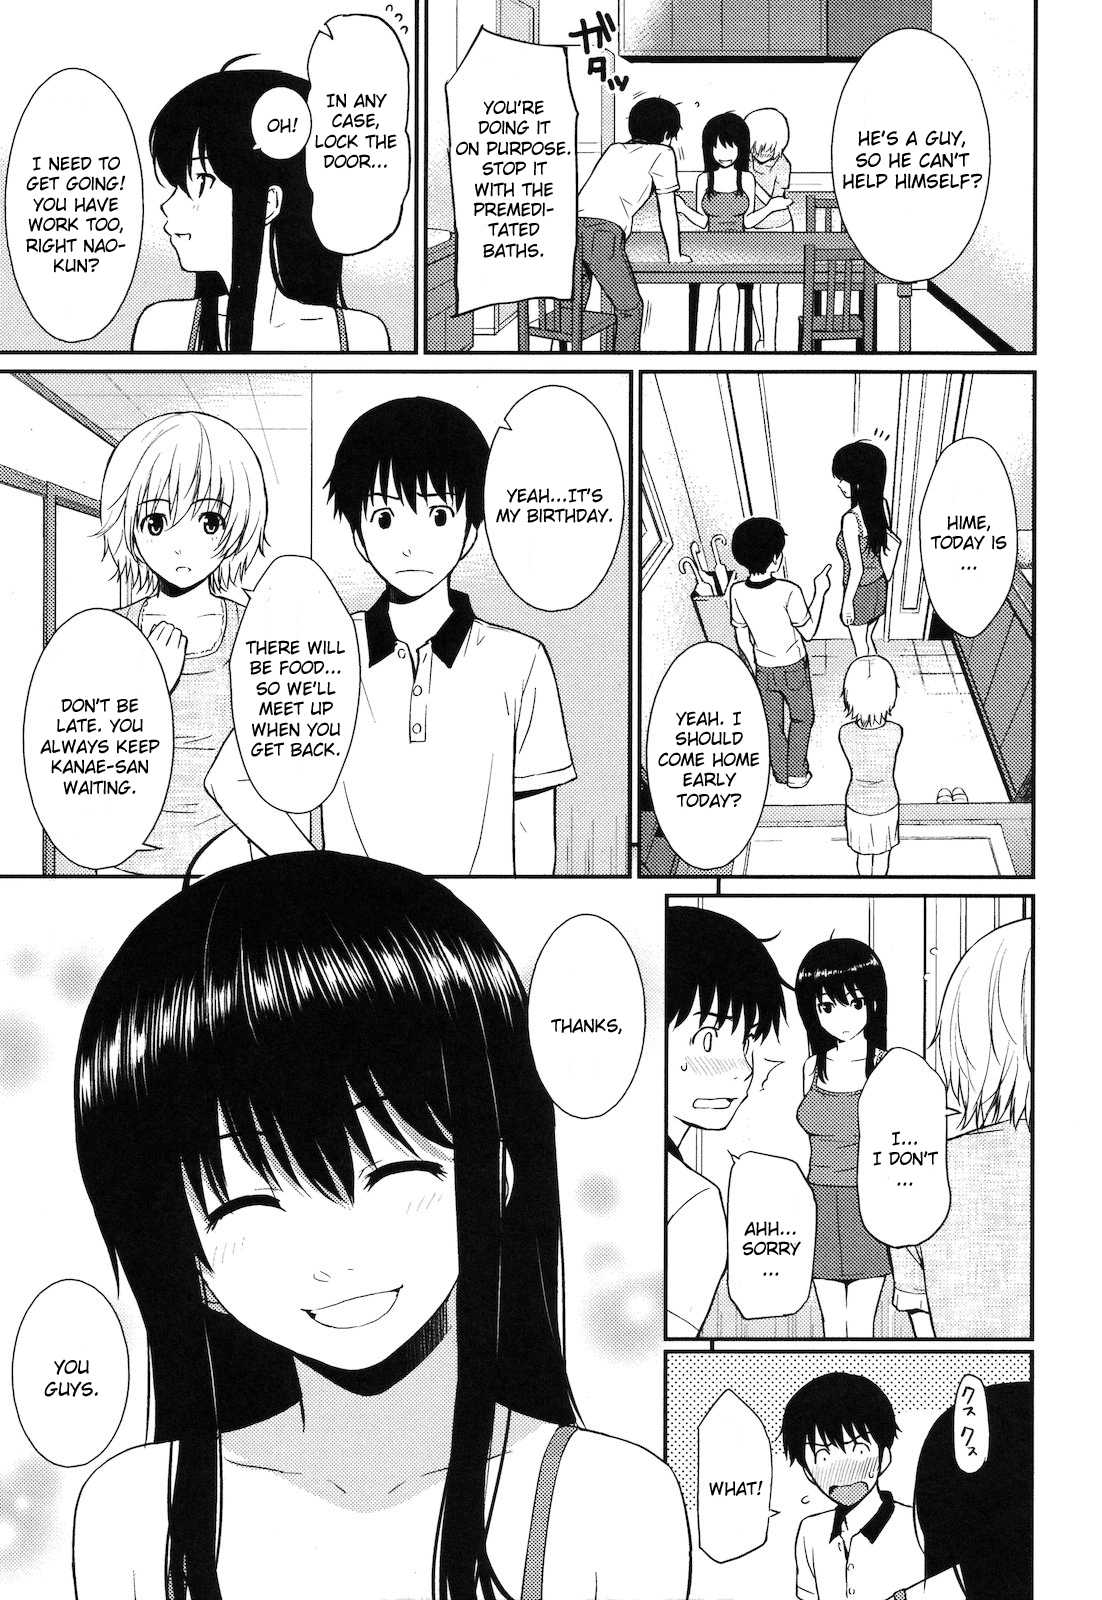 [Homunculus] Home Mate (Complete) [English] (CGrascal) 